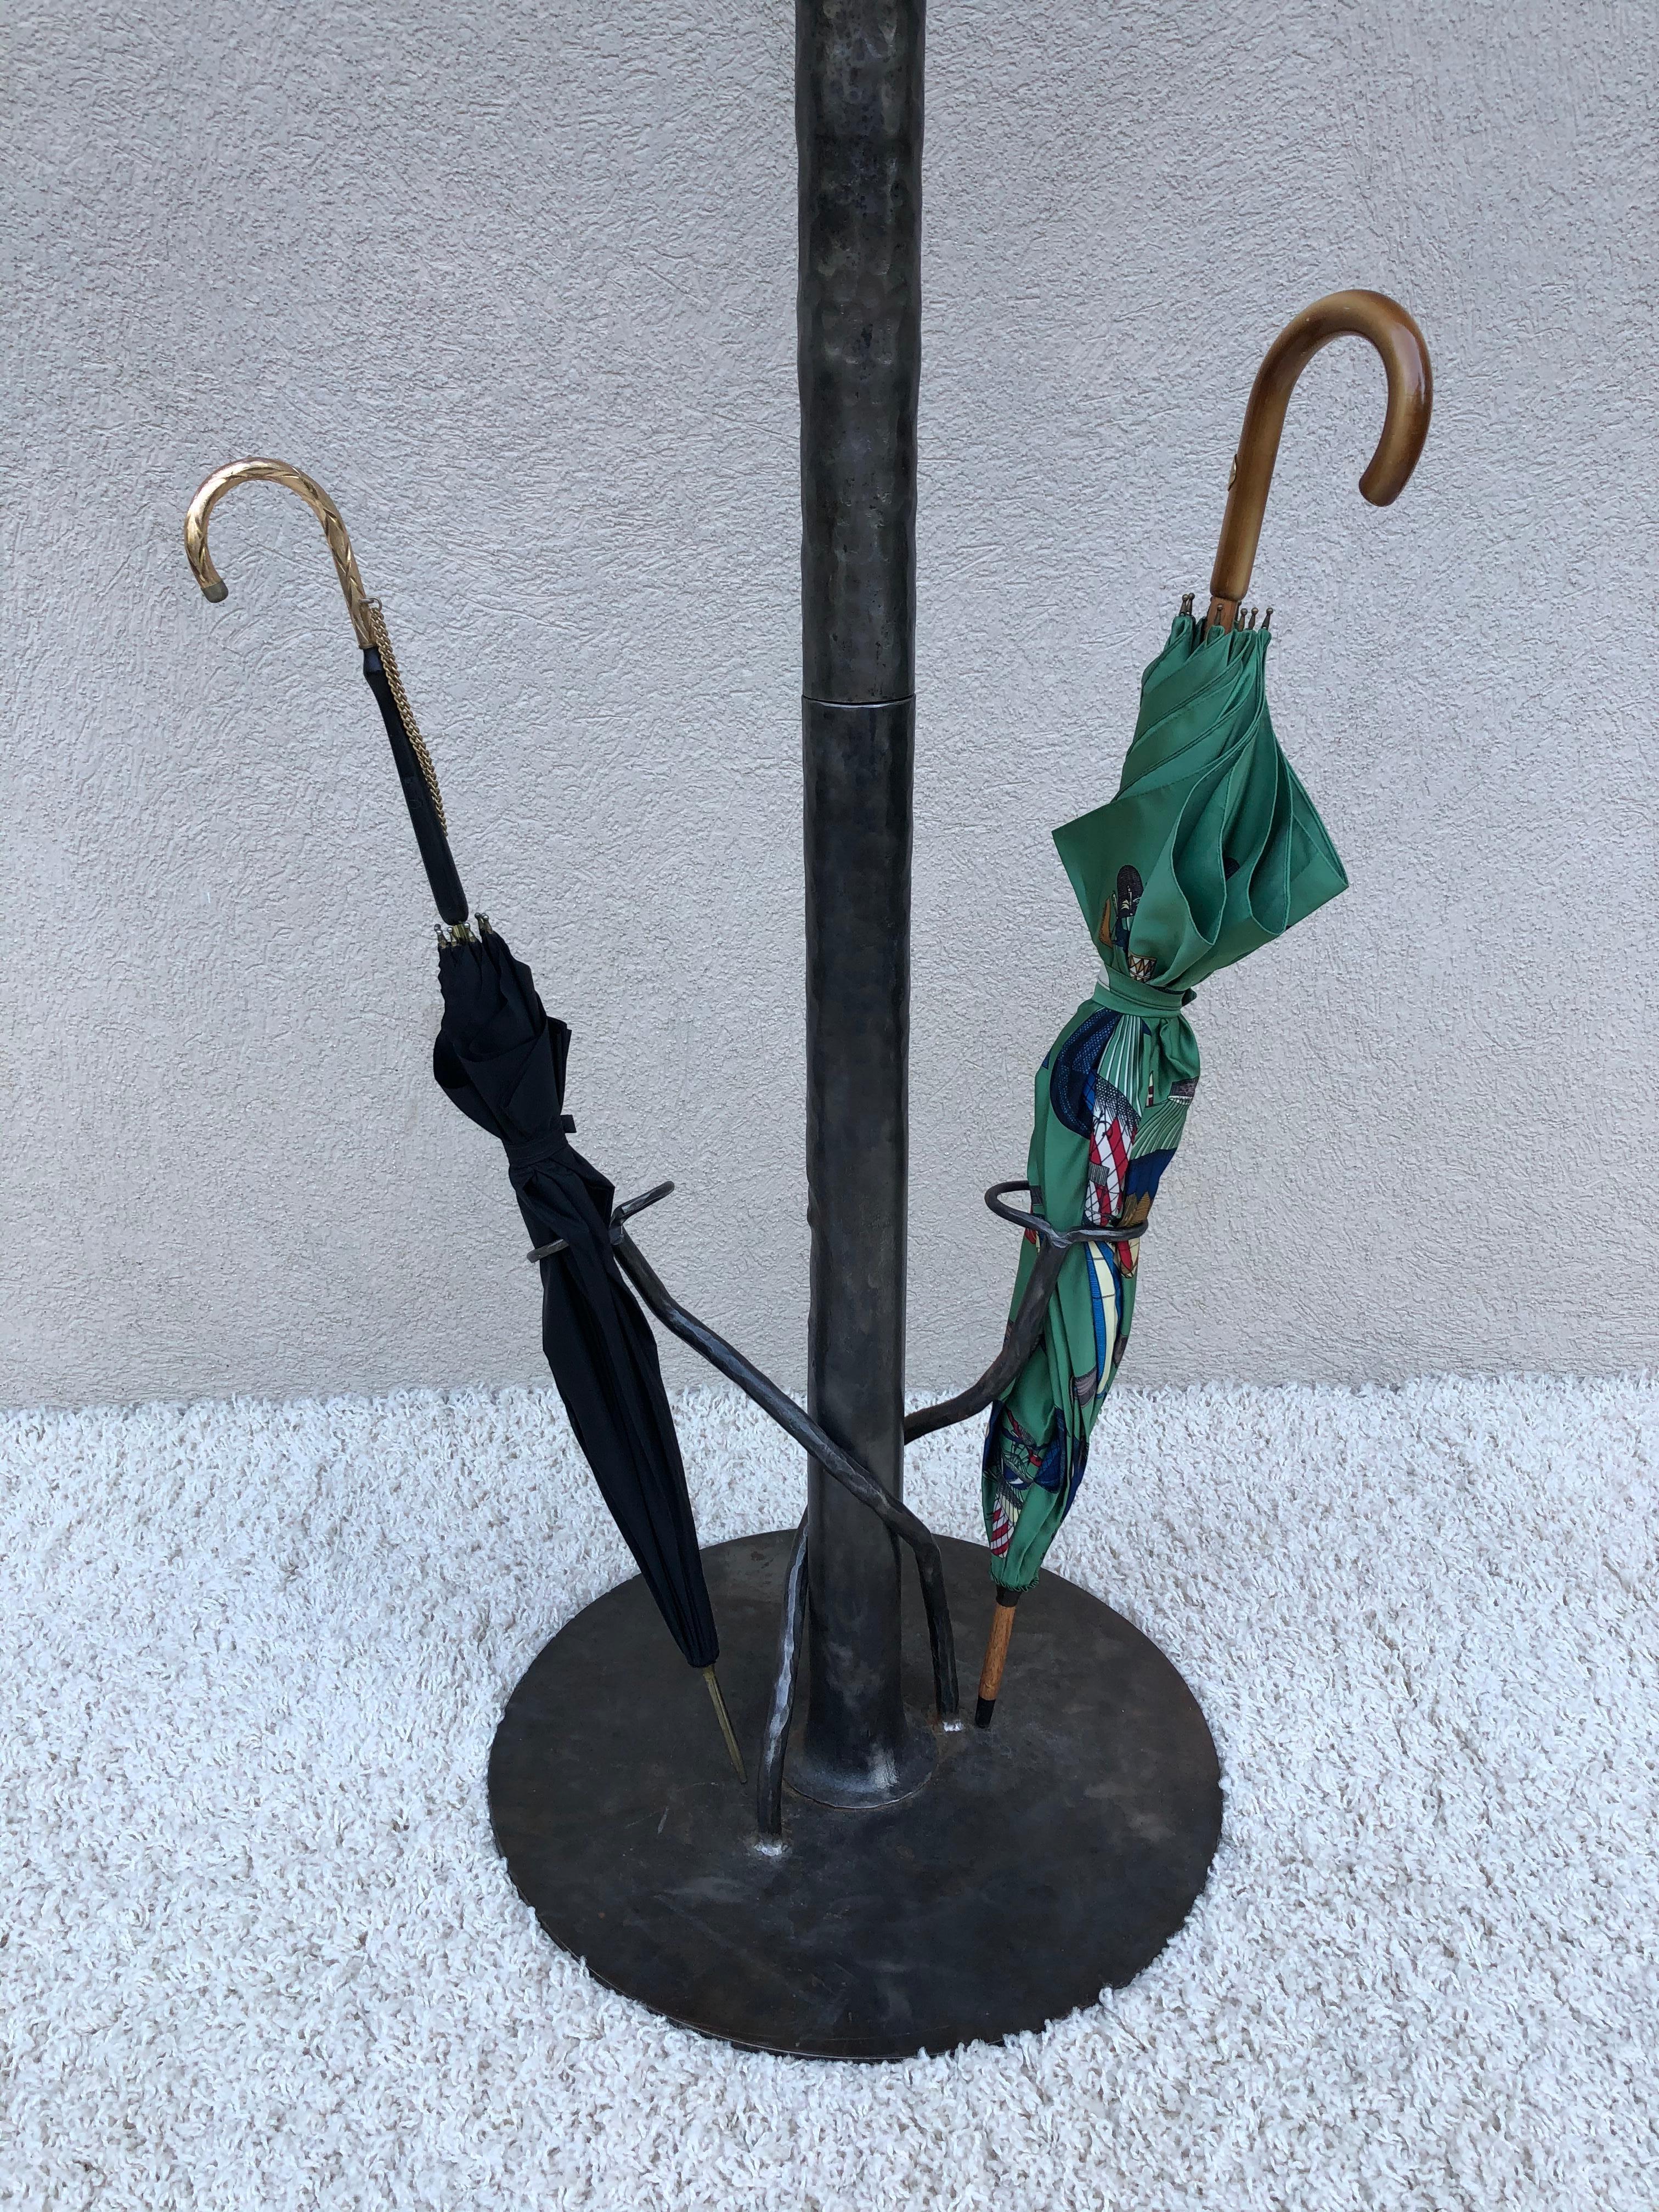 Anodized Handwrought Cactus Coat Hall Tree /Umbrella Stand Entrance Sculpture For Sale